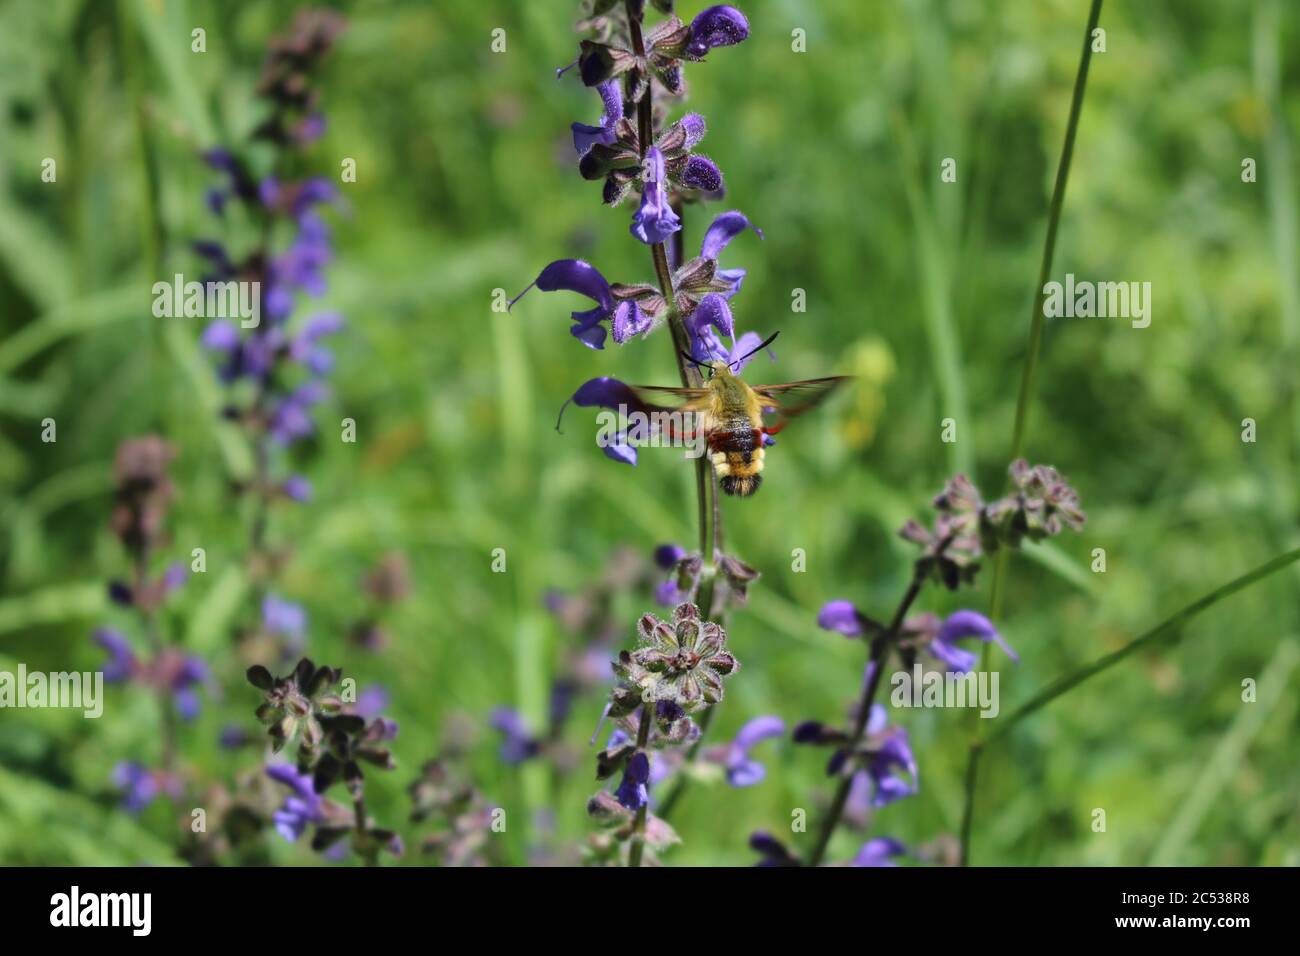 A Hummingbird Moth hovering taking nectar from a purple flower in the French Alps Stock Photo